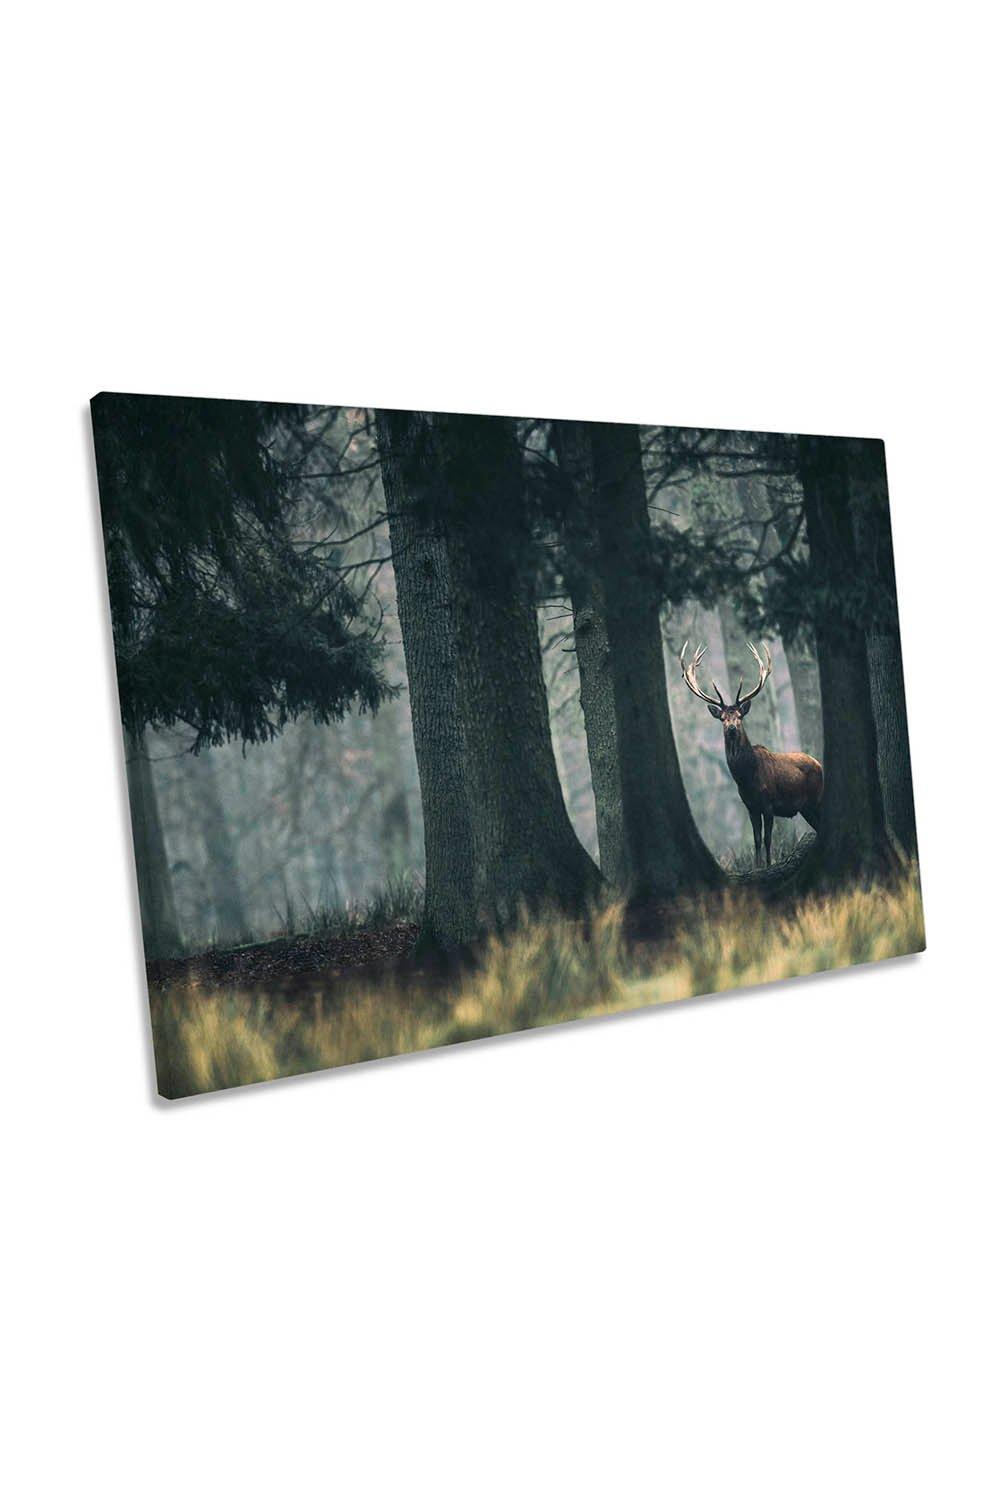 King of the Forest Stag Deer Wildlife Canvas Wall Art Picture Print